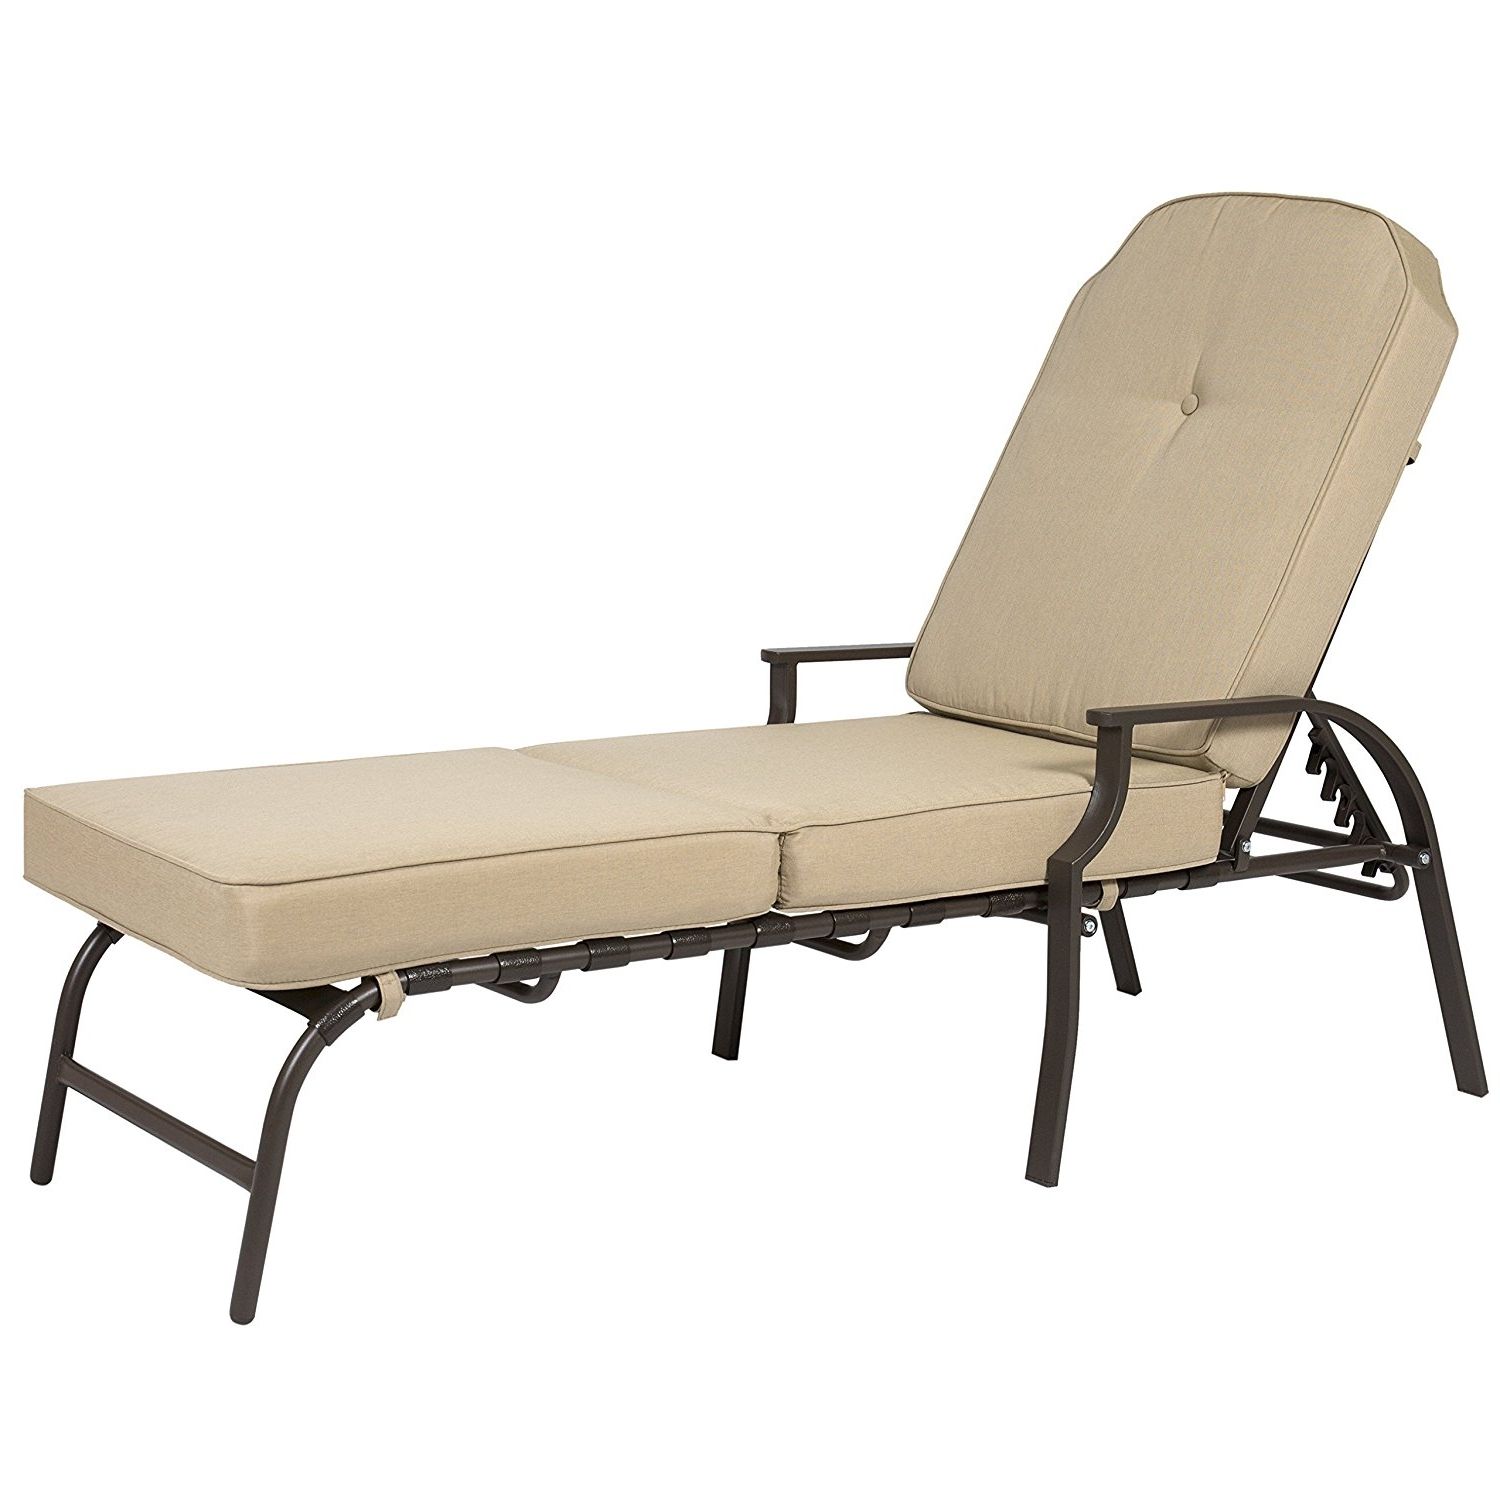 Most Recently Released Metal Chaise Lounge Chairs For Amazon : Best Choice Products Outdoor Chaise Lounge Chair W (View 6 of 15)